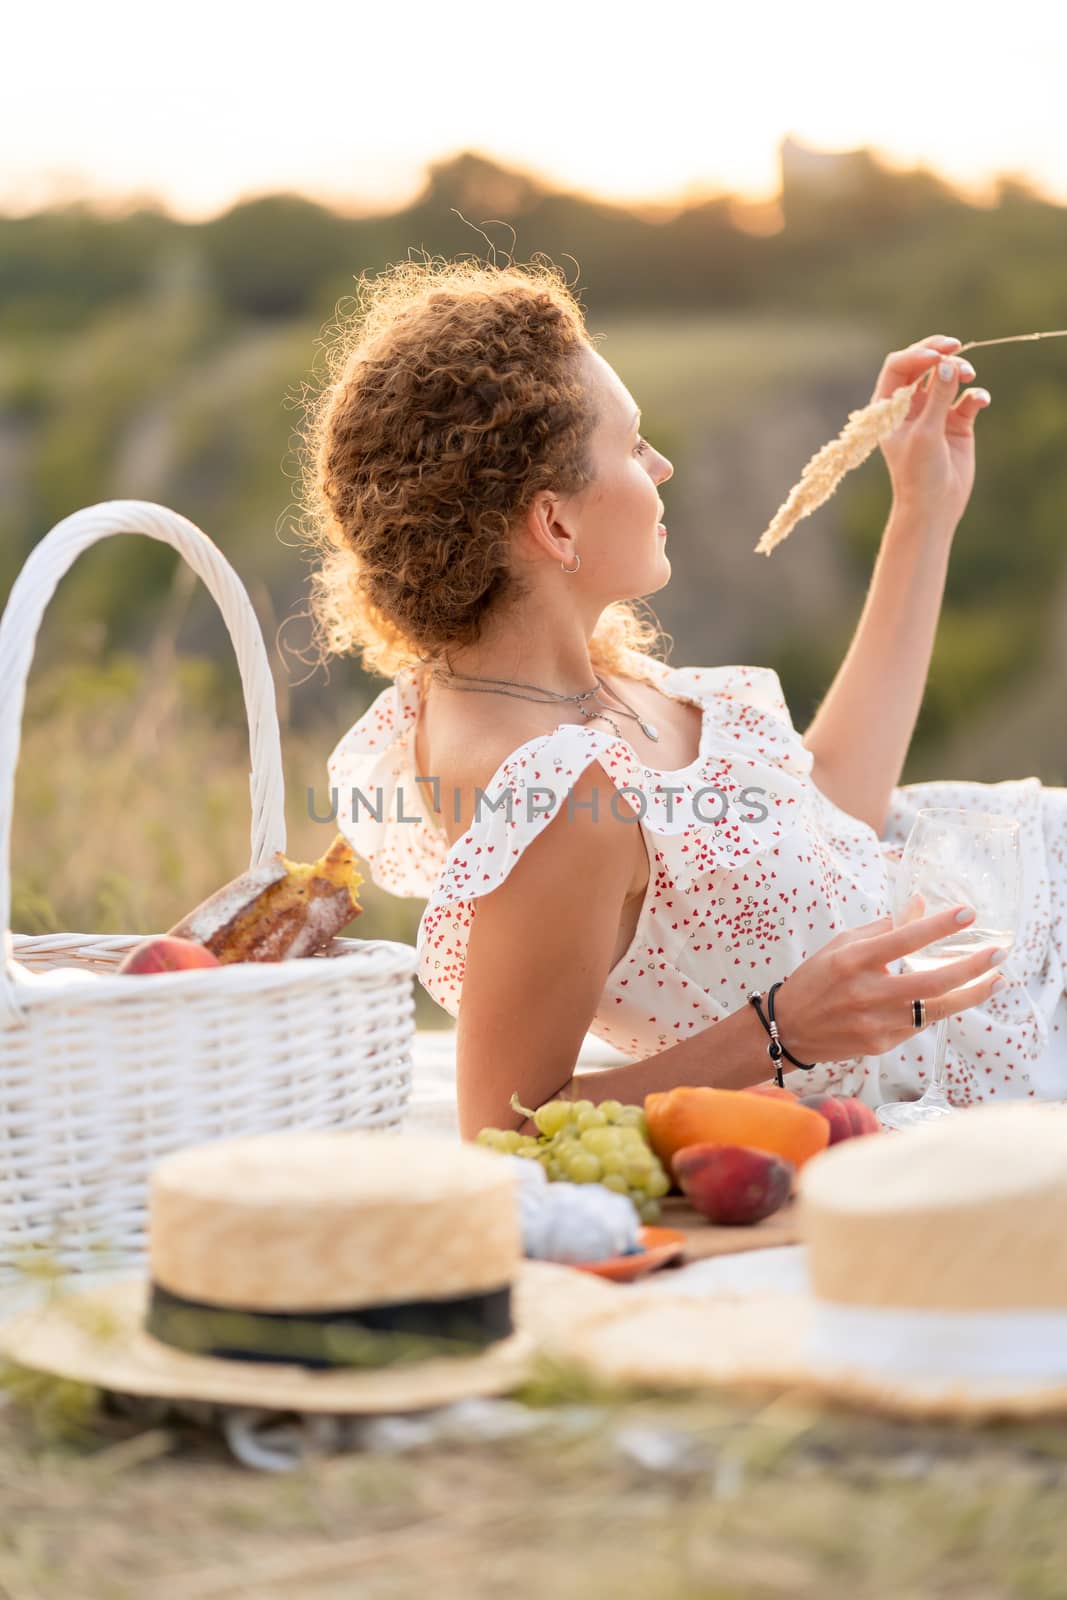 Beautiful girl enjoys a picnic at sunset in a beautiful place. by Try_my_best